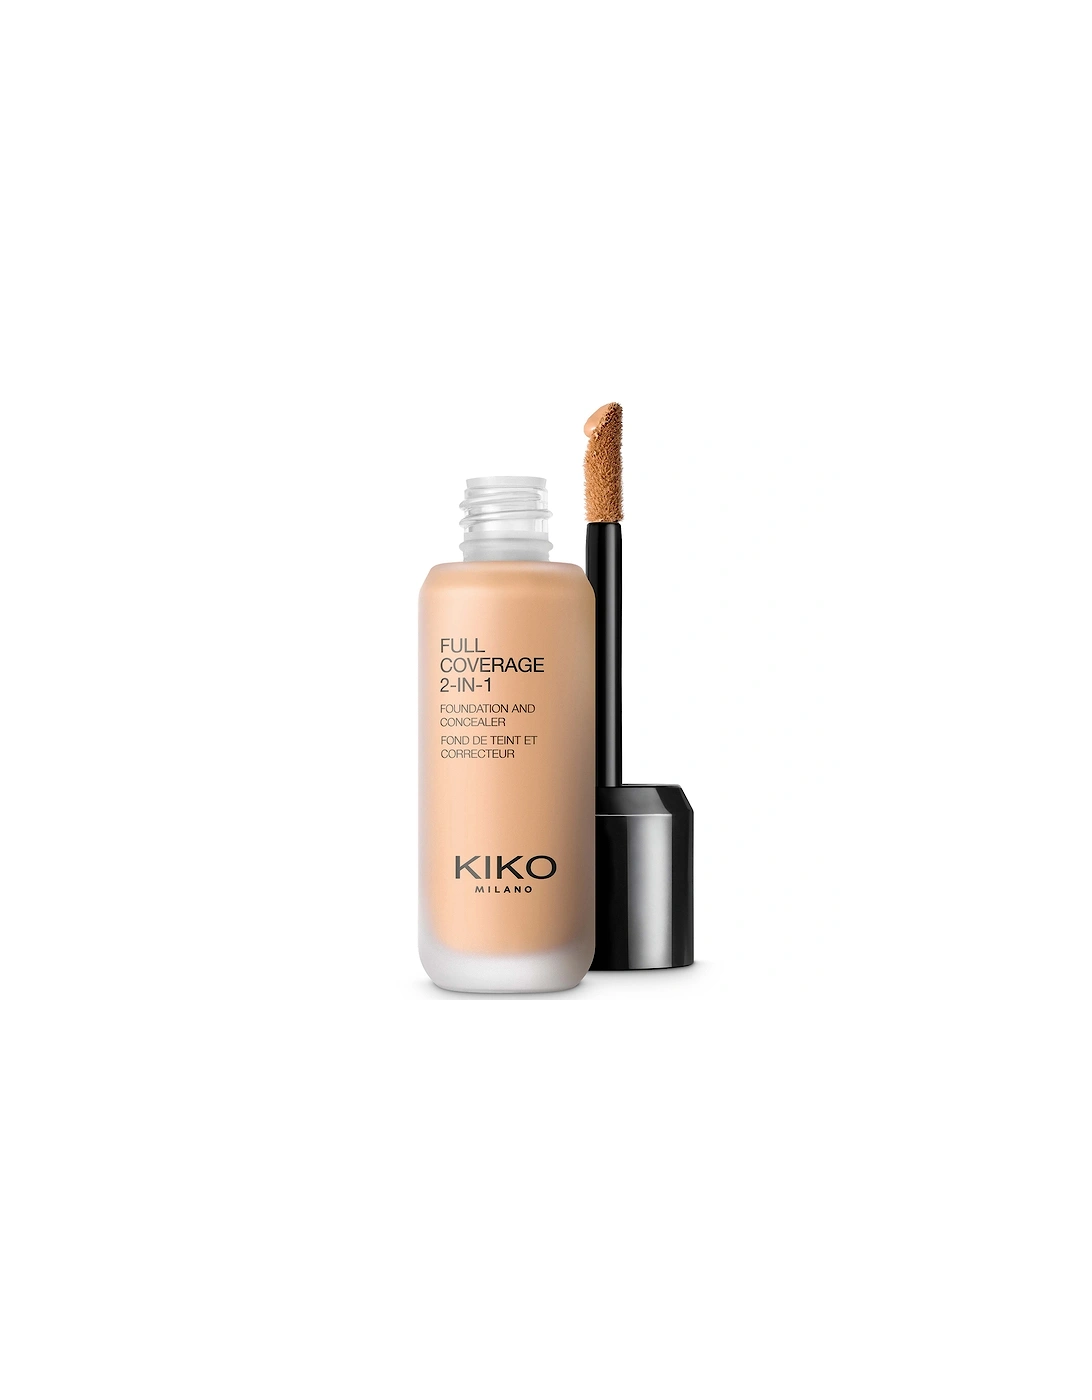 Full Coverage 2-in-1 Foundation and Concealer 25ml - 60 Warm Beige, 2 of 1